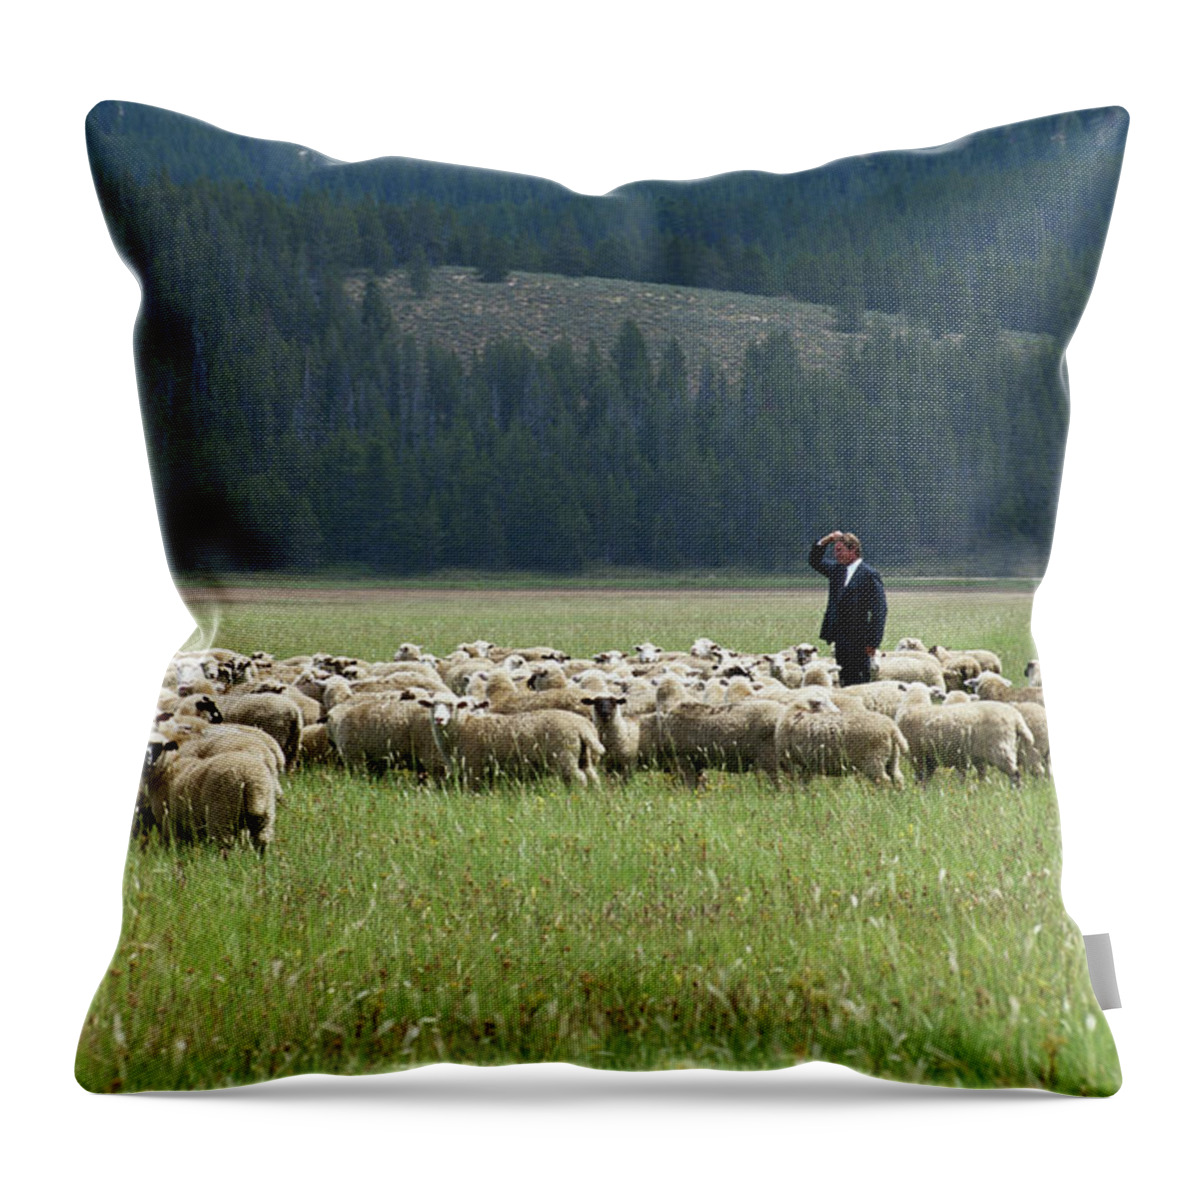 Corporate Business Throw Pillow featuring the photograph Businessman Standing In Herd Of Sheep by Steve Smith